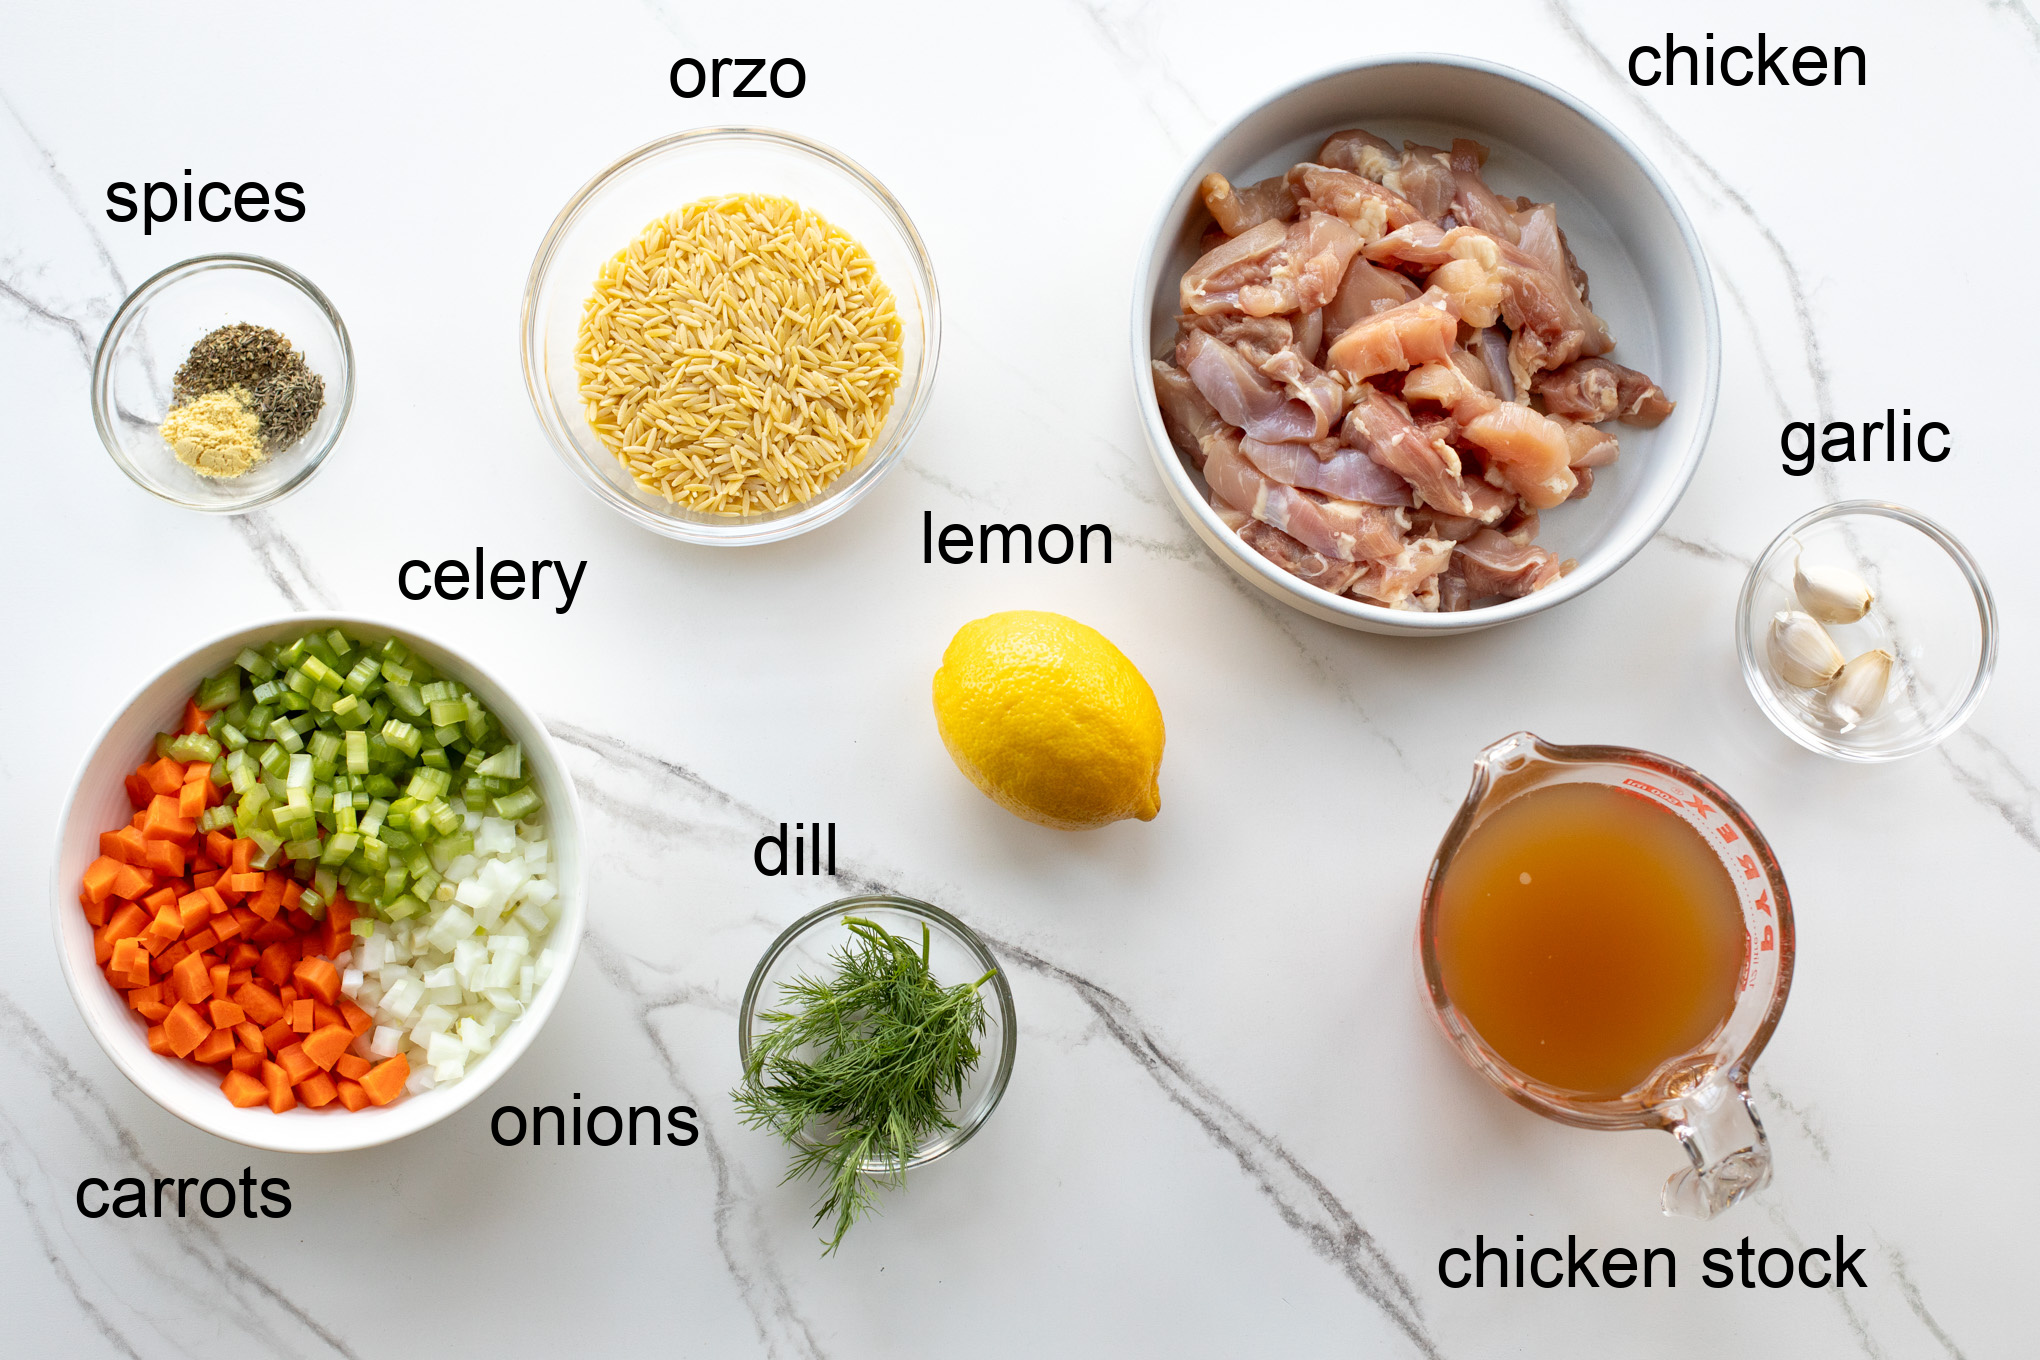 ingredients for orzo soup.